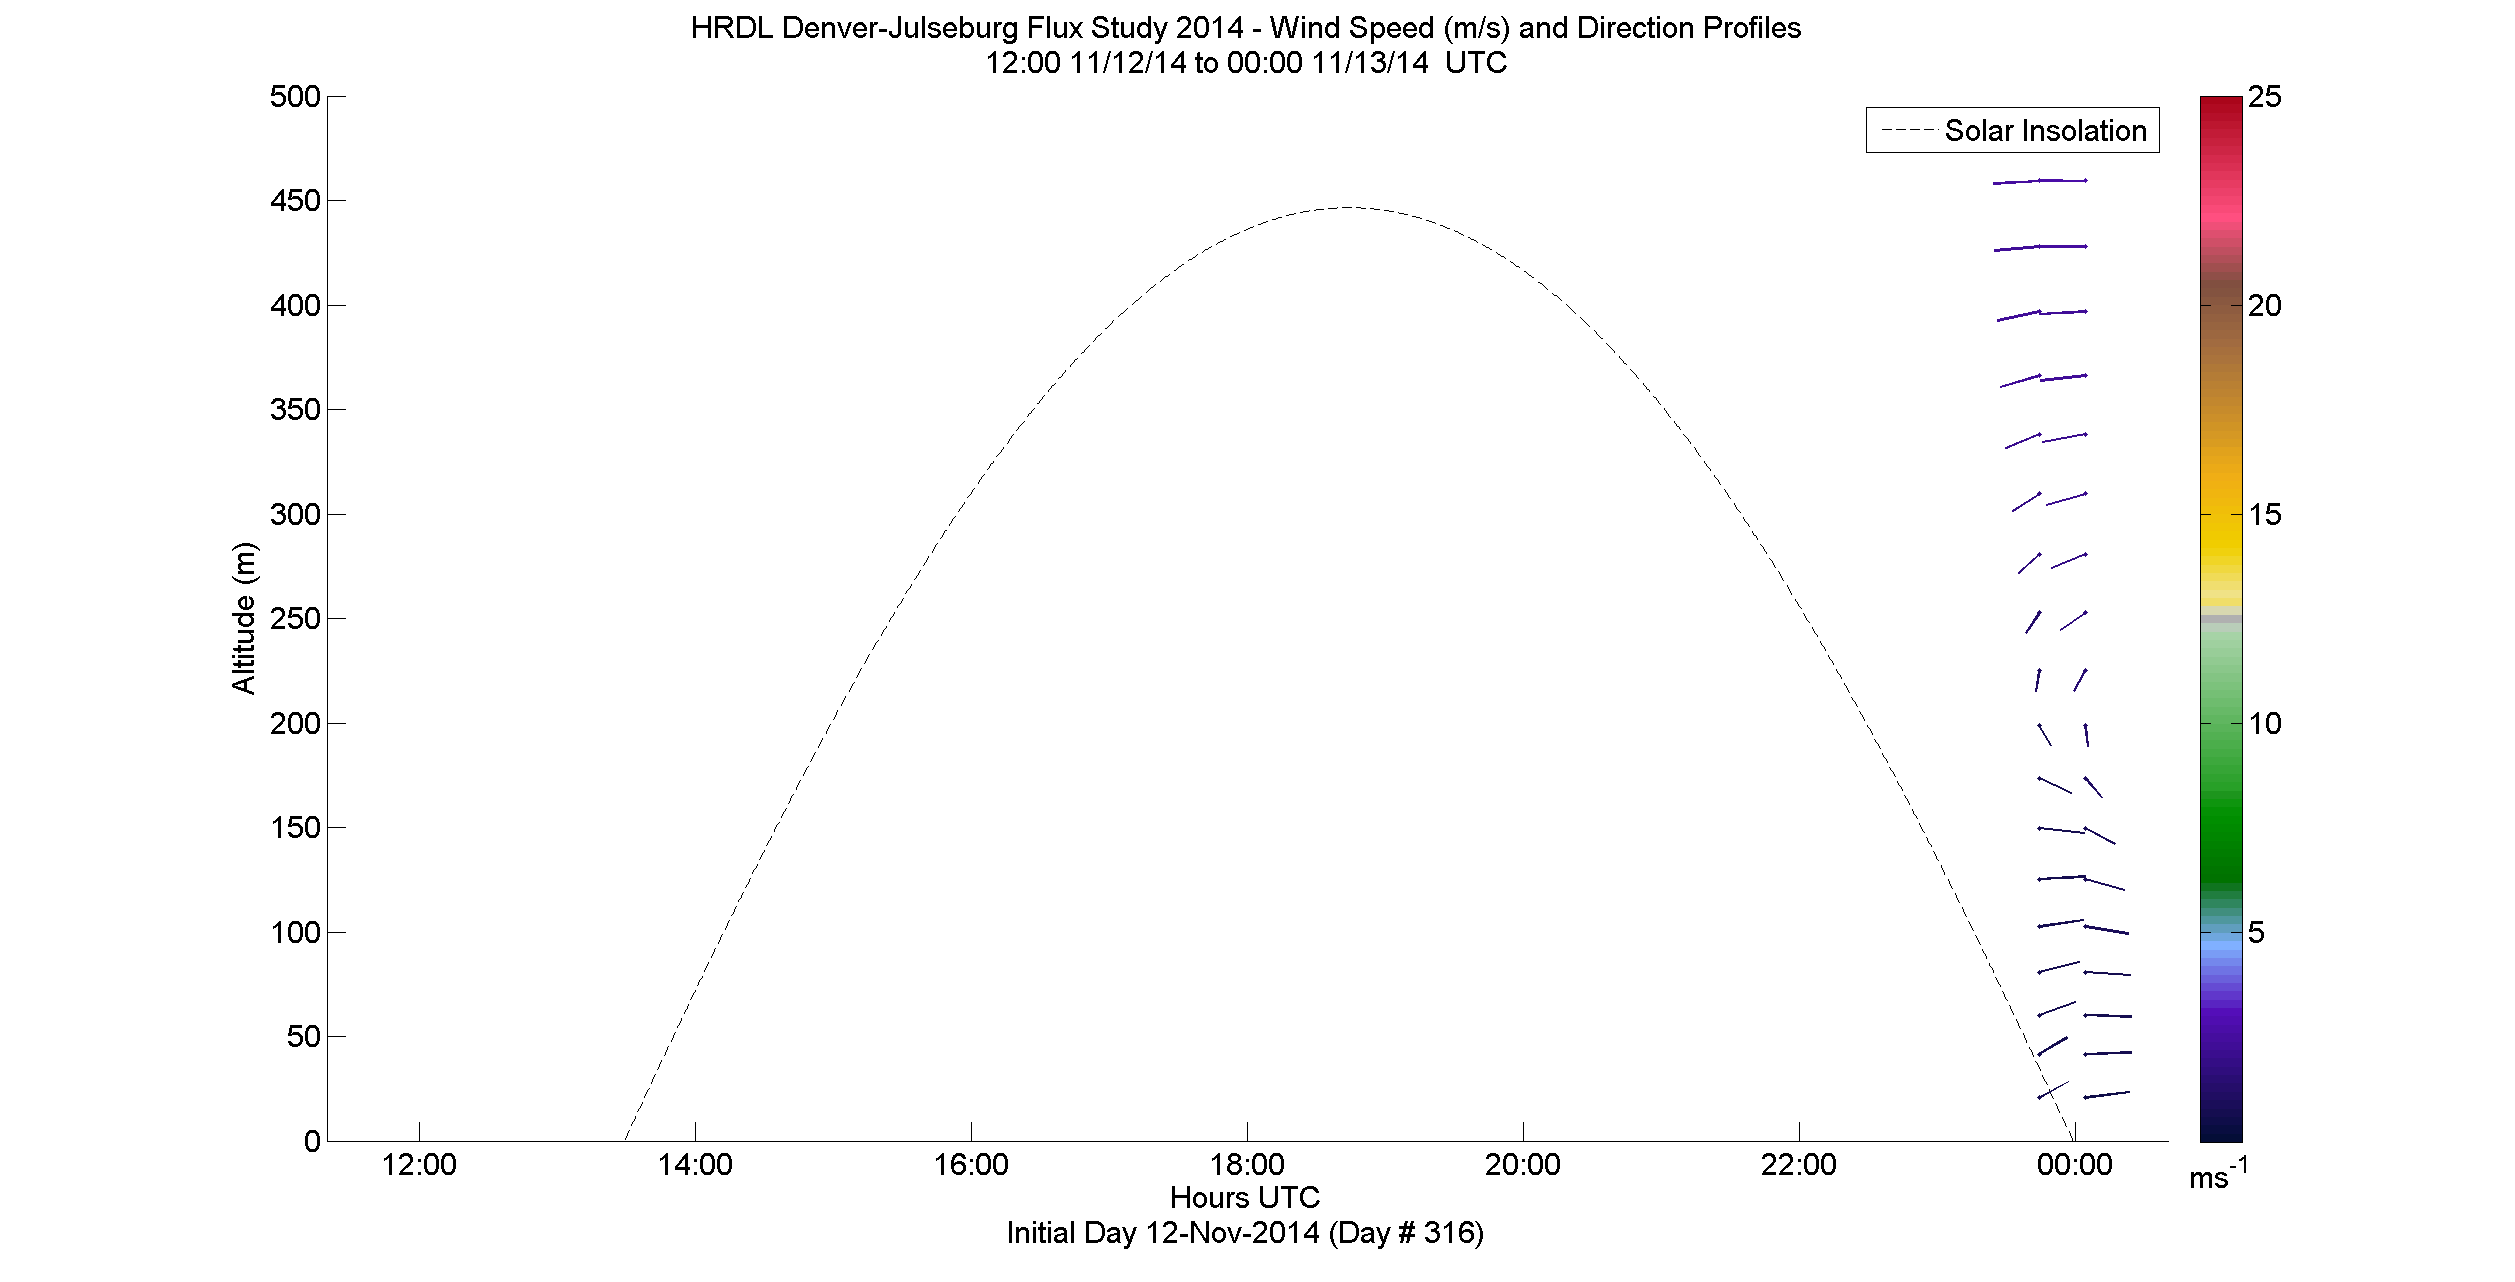 HRDL speed and direction profile - November 12 pm